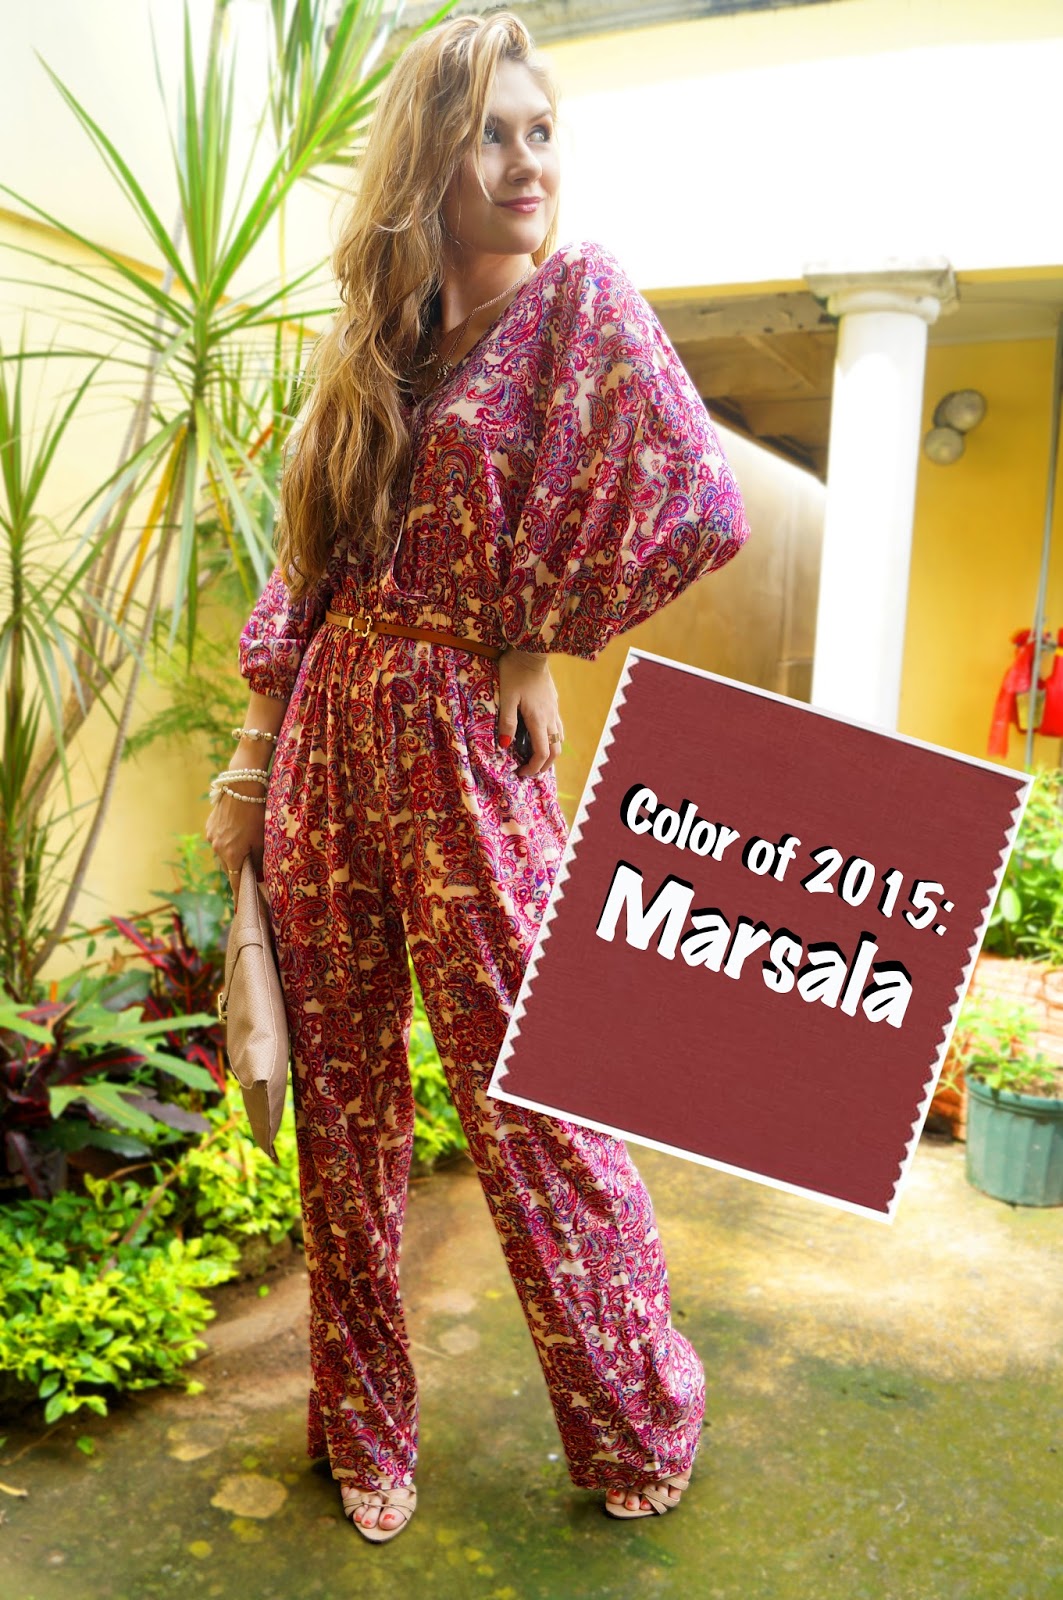 The Official Color of 2015 is Marsala. Click through for tips on how to wear it this season!